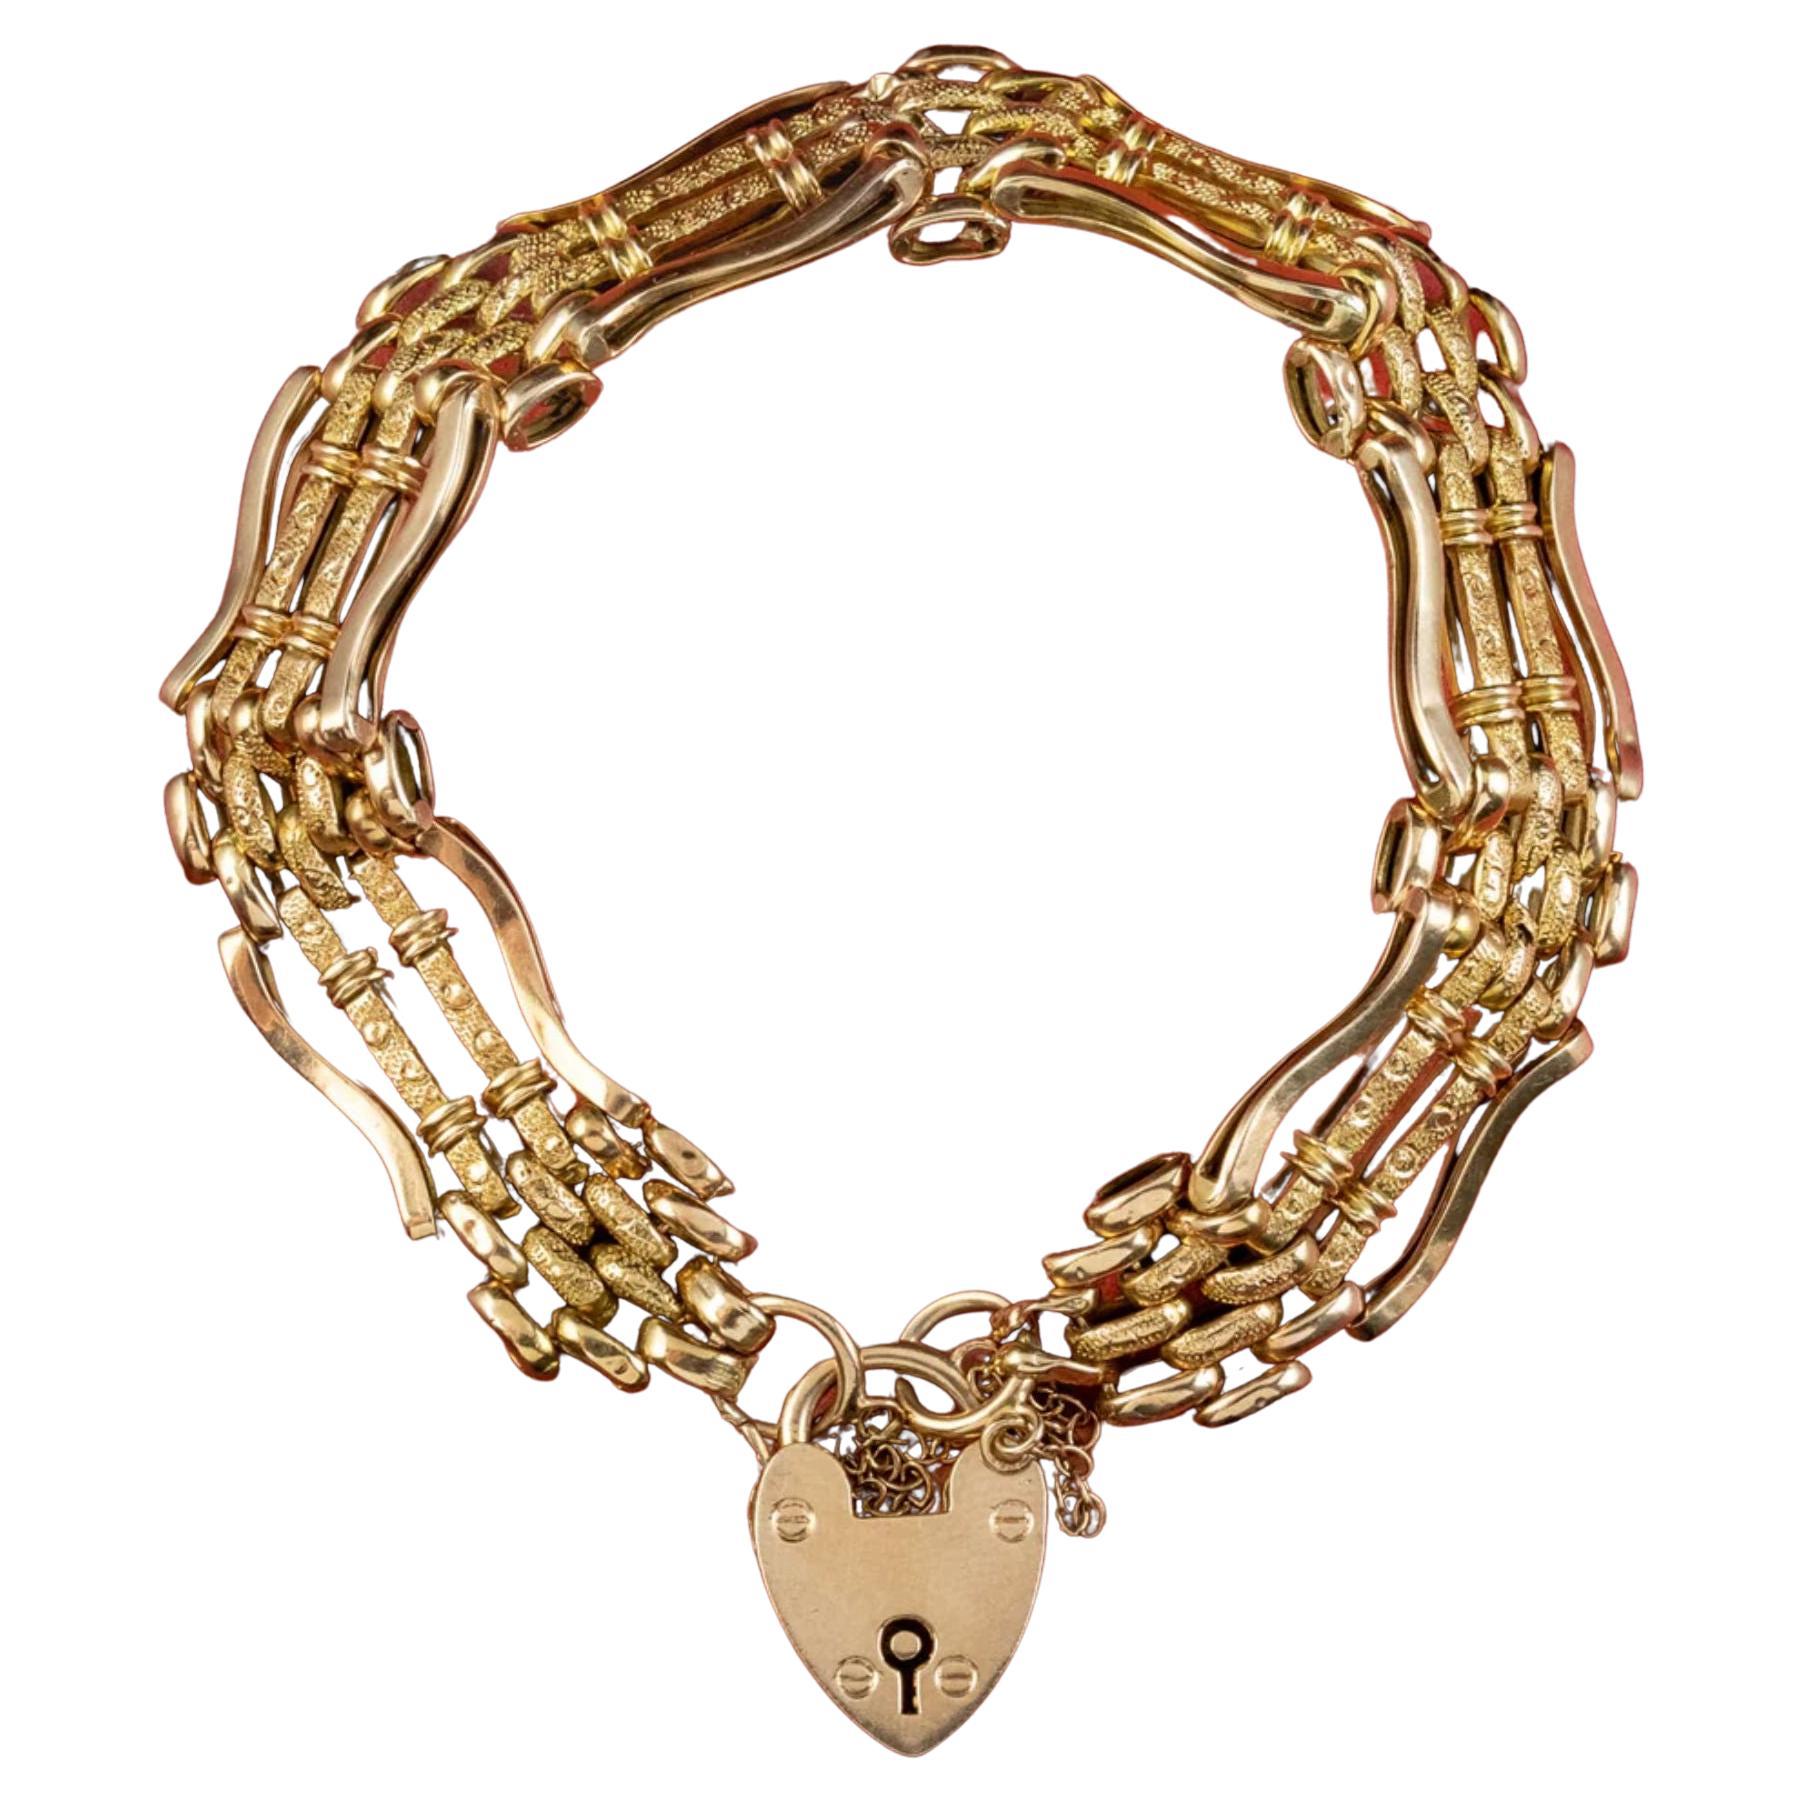 Antique Victorian Gate Bracelet in 9 Carat Gold with Heart Padlock, circa 1900 For Sale